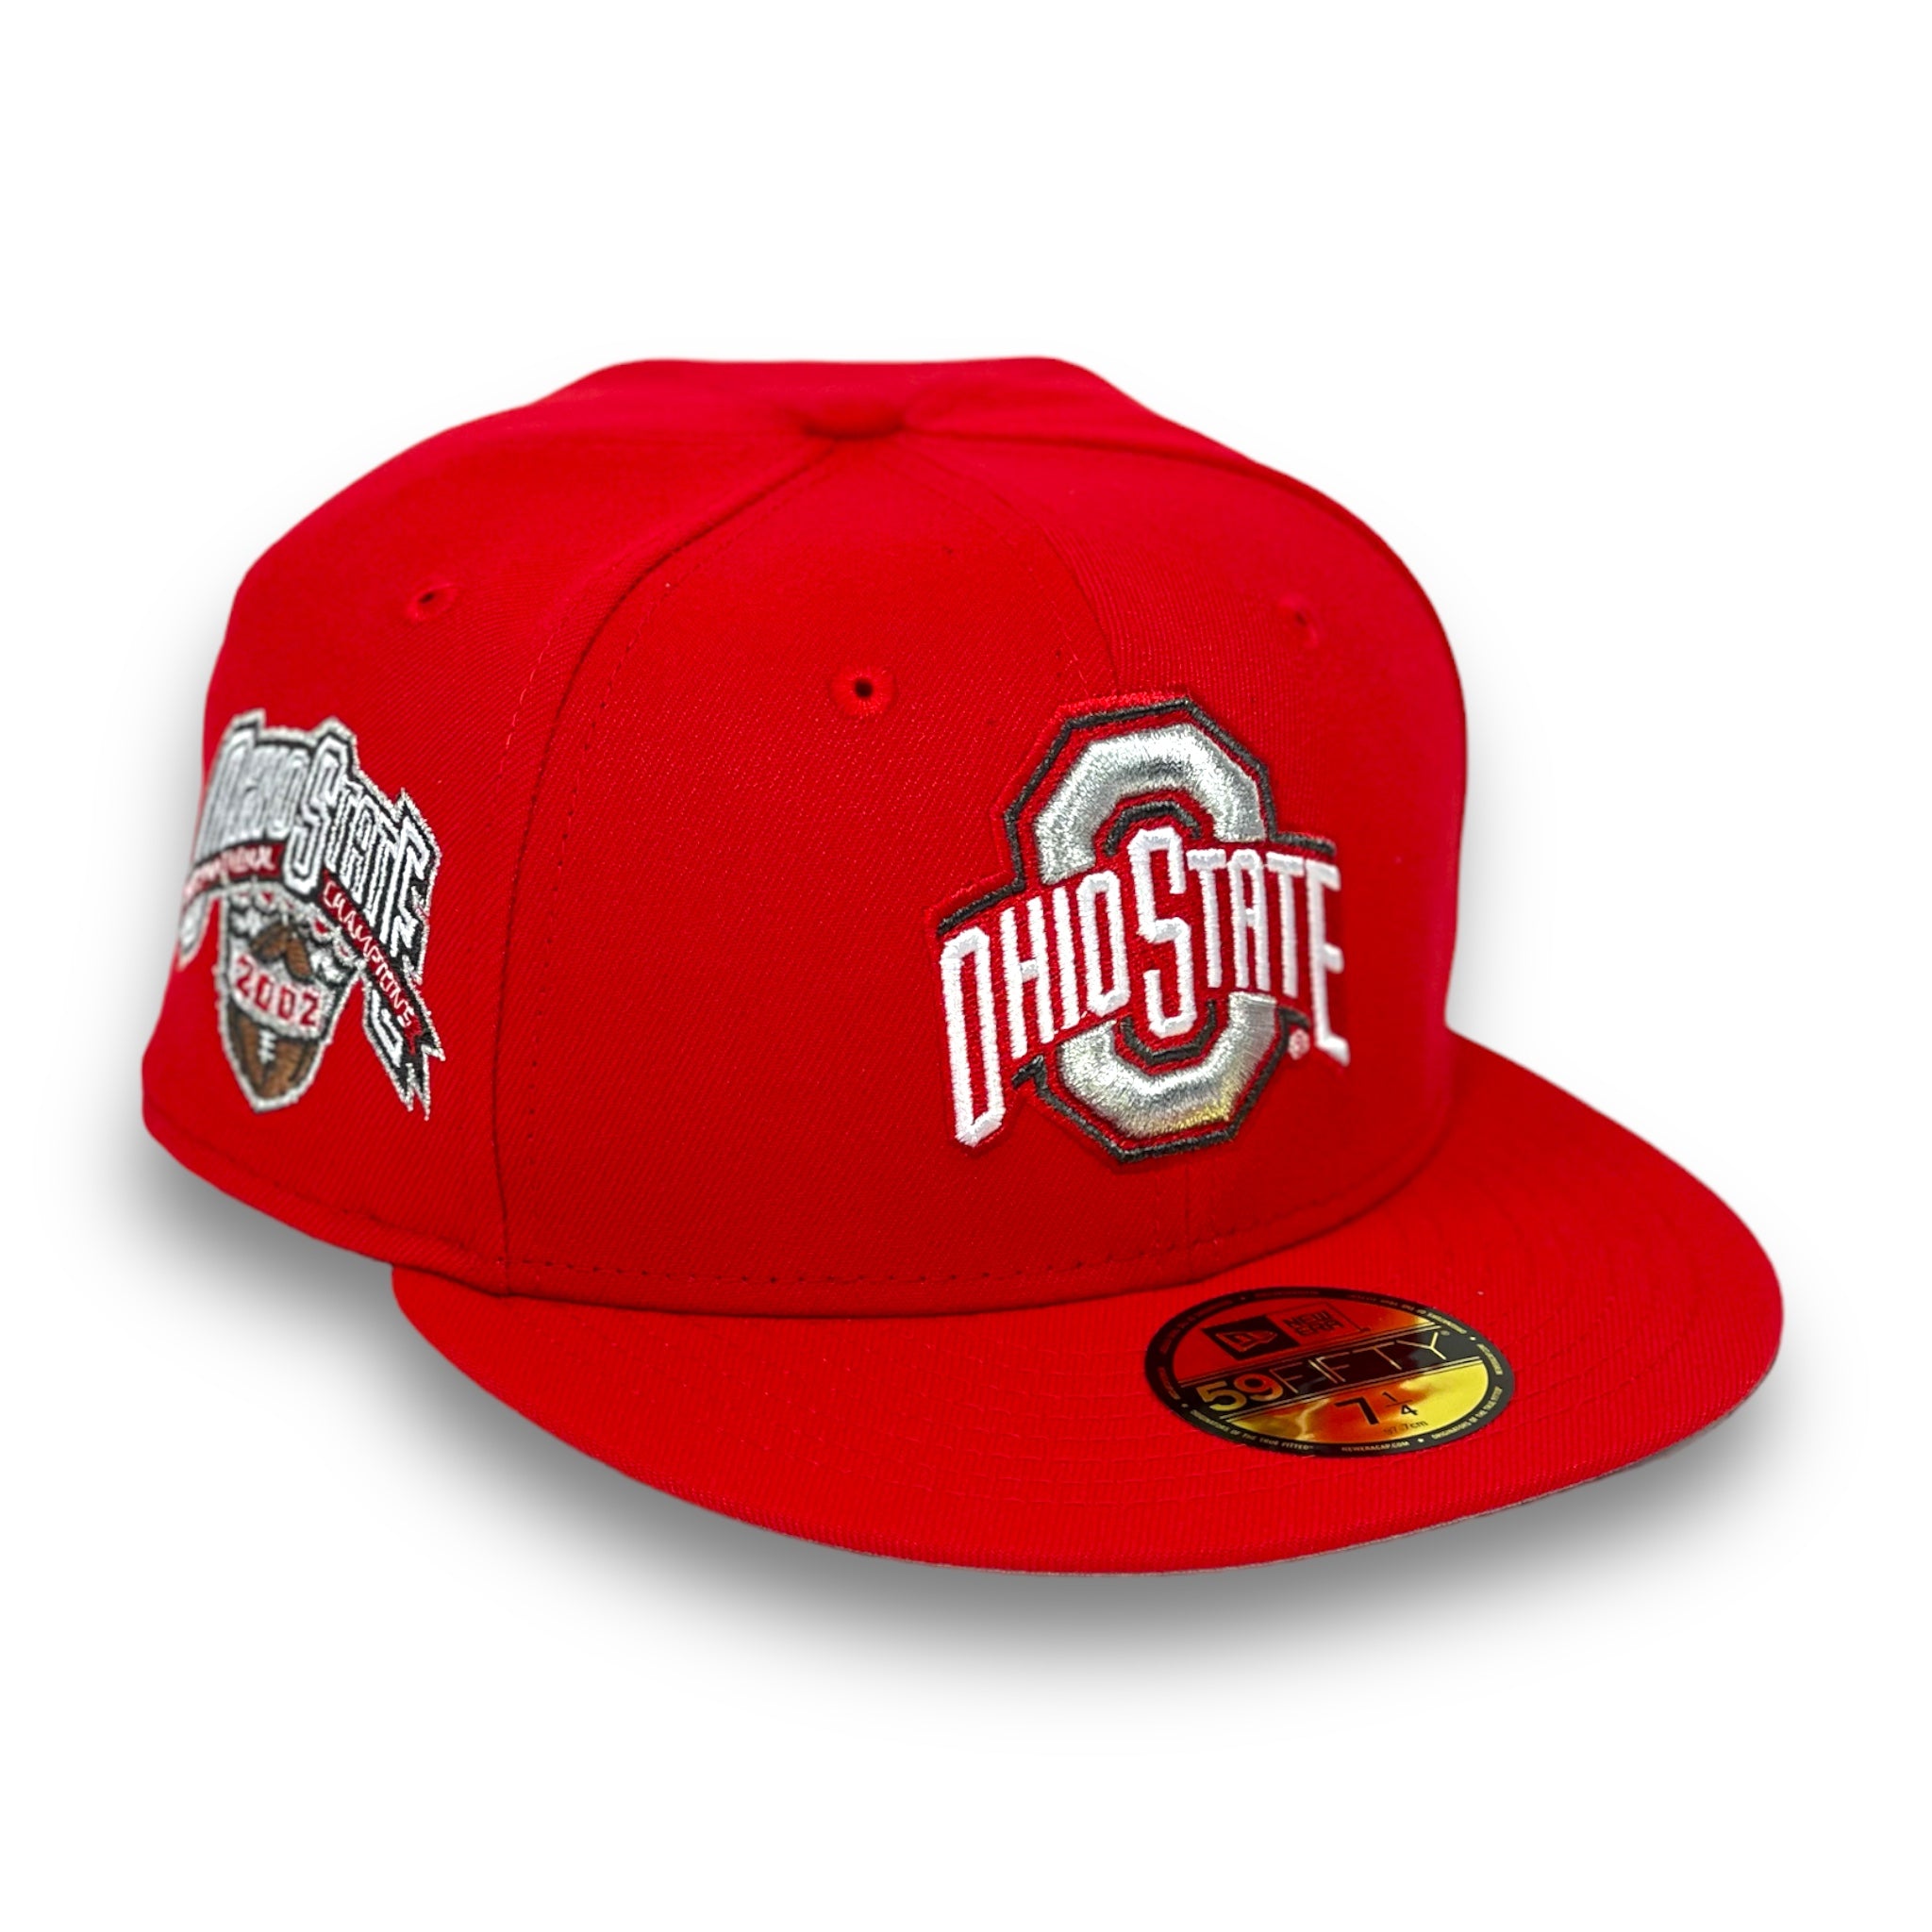 OHIO STATE BUCKEYES (2002 NATIONAL CHAMPS) NEW ERA 59FIFTY FITTED